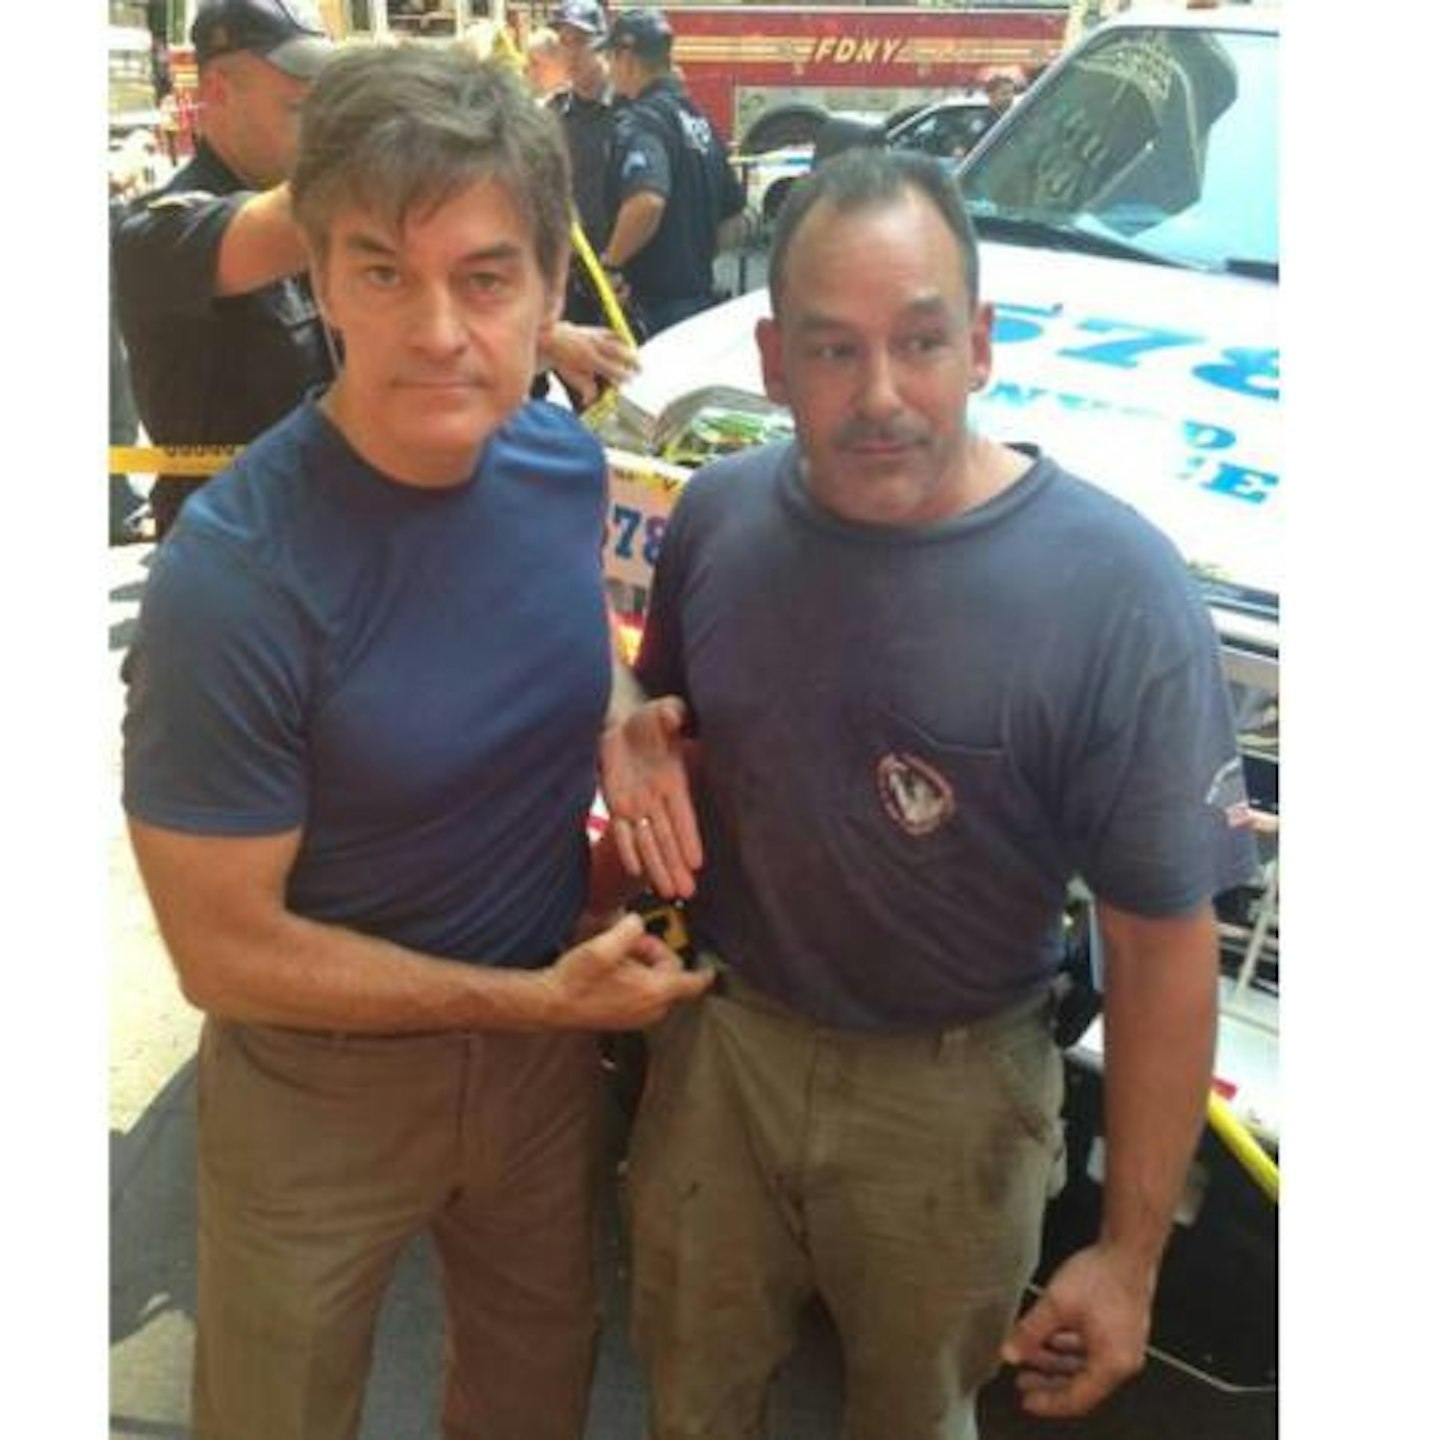 Plumber David Justino (right) used his belt to make a life-saving tourniquet for her leg, while celebrity doctor Mehmet Oz (left) also raced to the scene